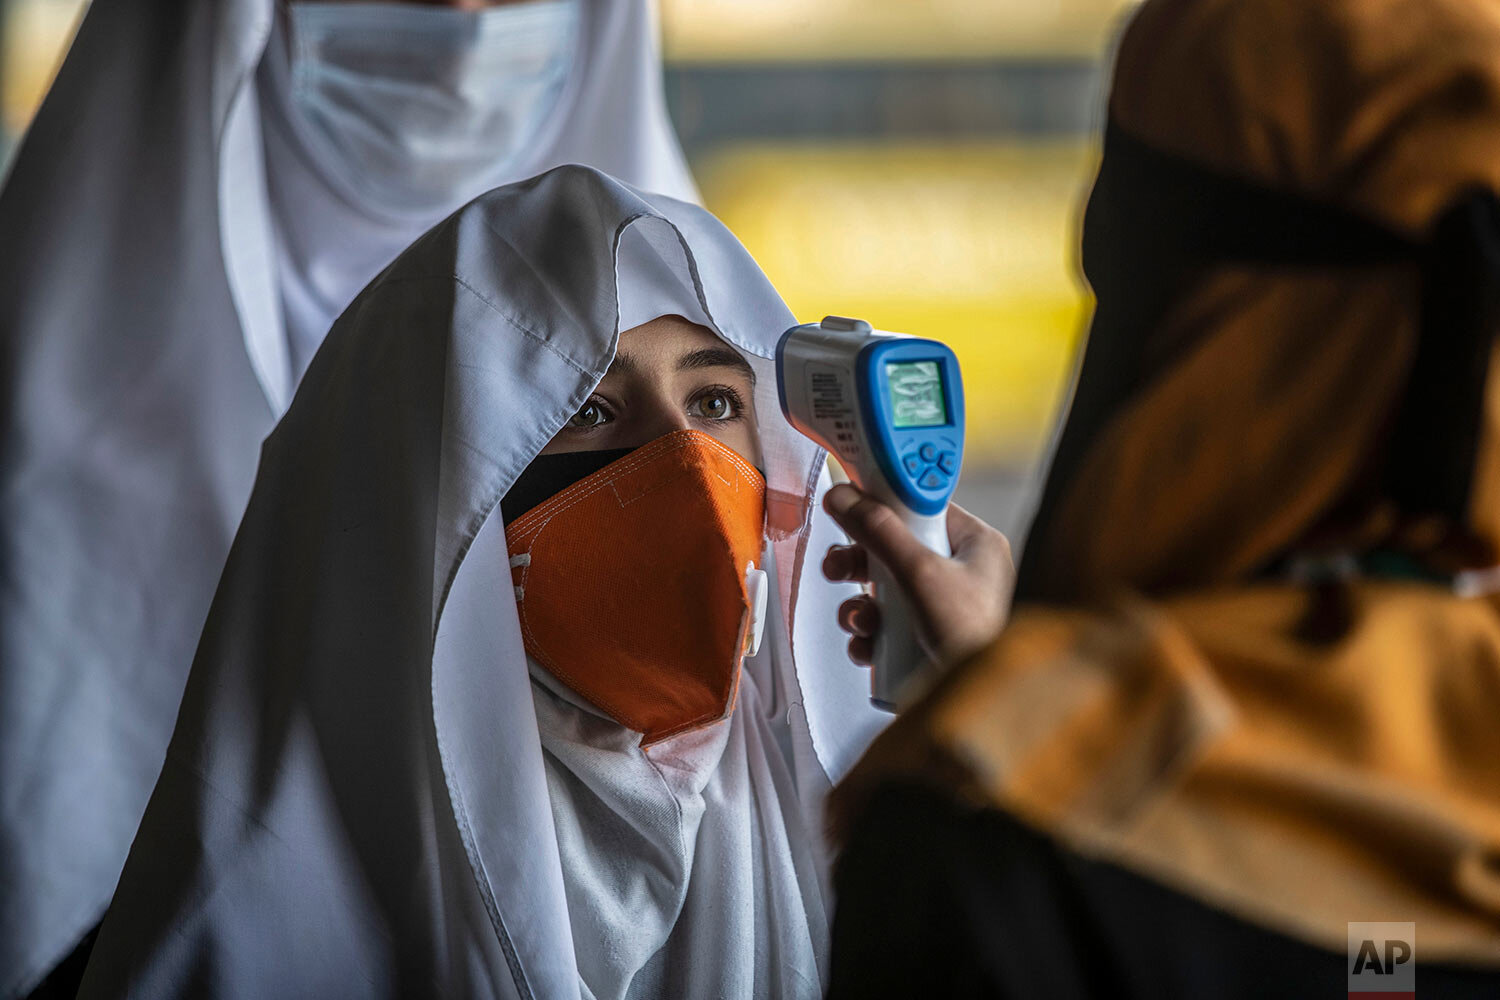  A staff member checks the temperature of students as they arrive to attend their school in Srinagar, Indian controlled Kashmir, Monday, March 15, 2021. (AP Photo/Mukhtar Khan) 